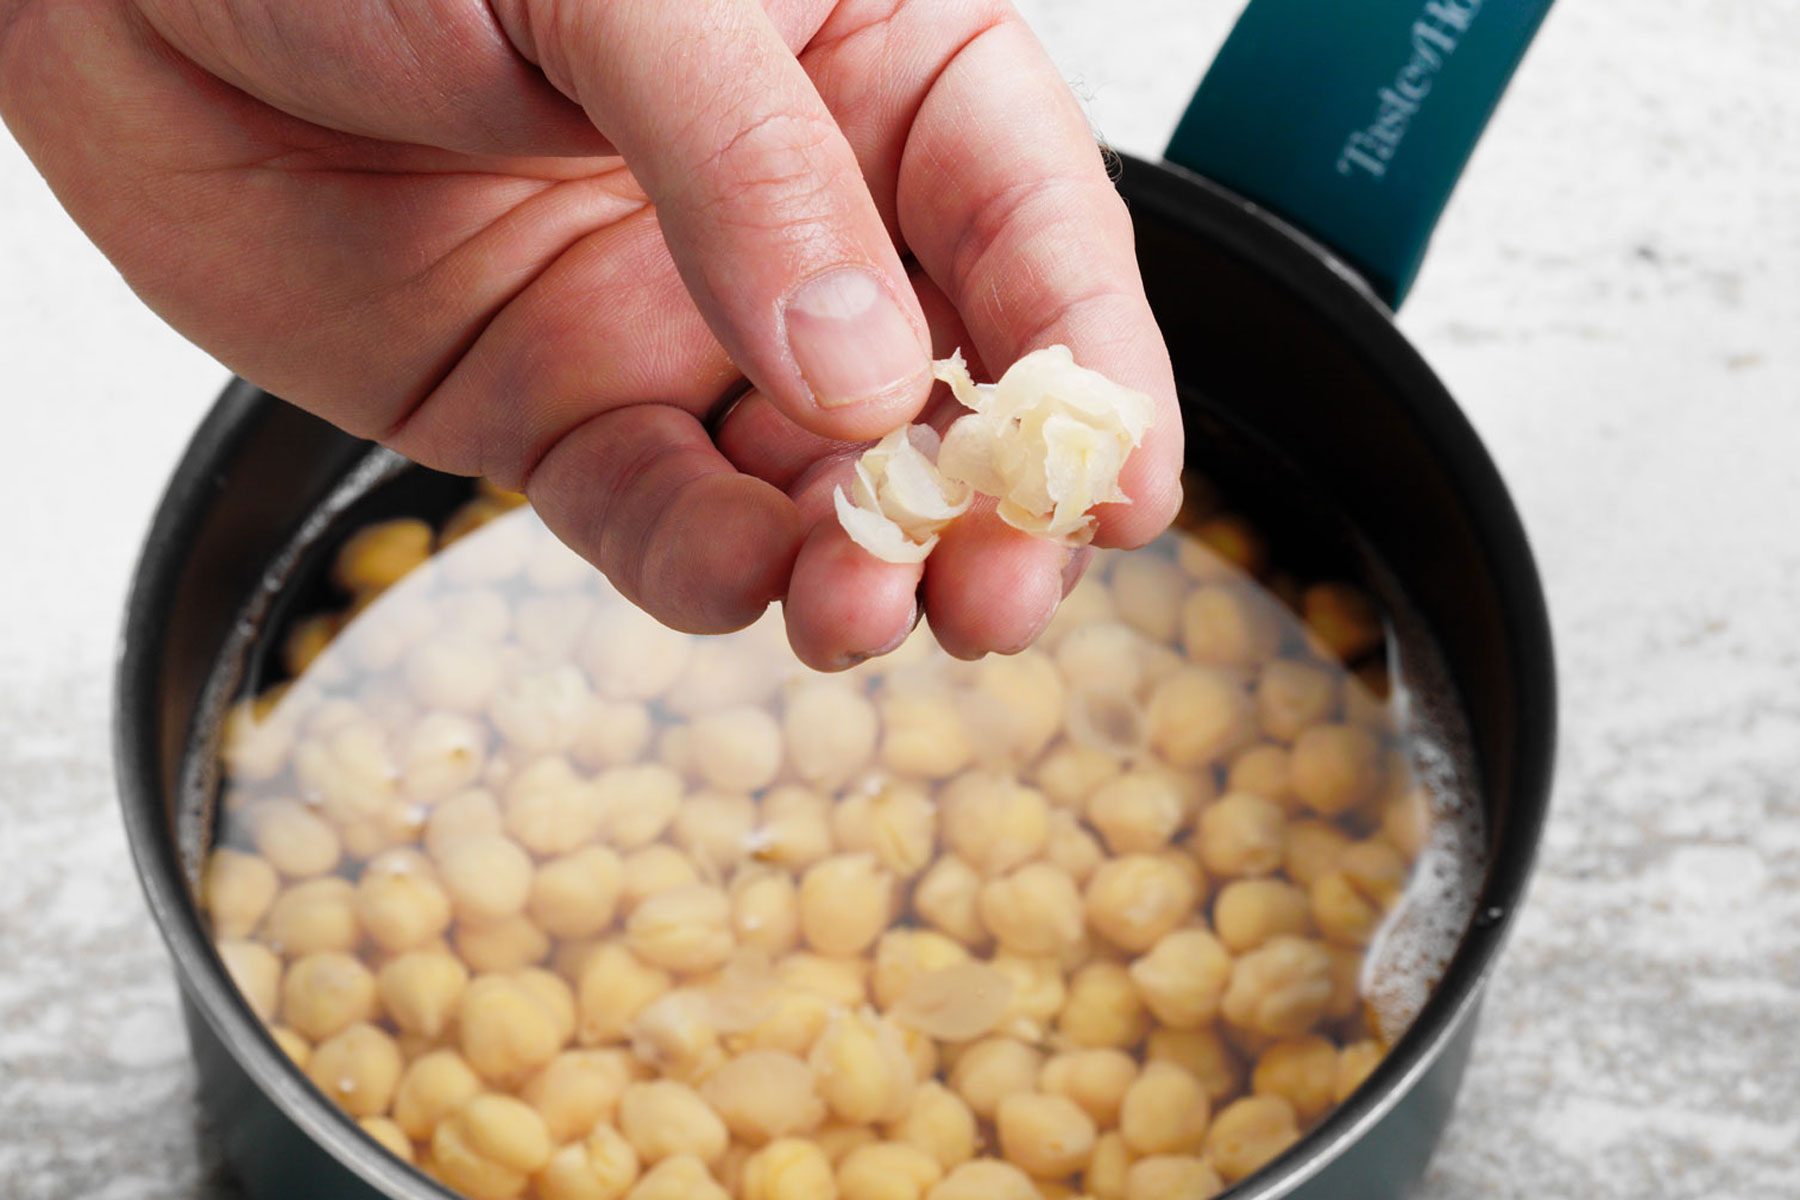 A person removing the skins from a chickpea to make homemade hummus.